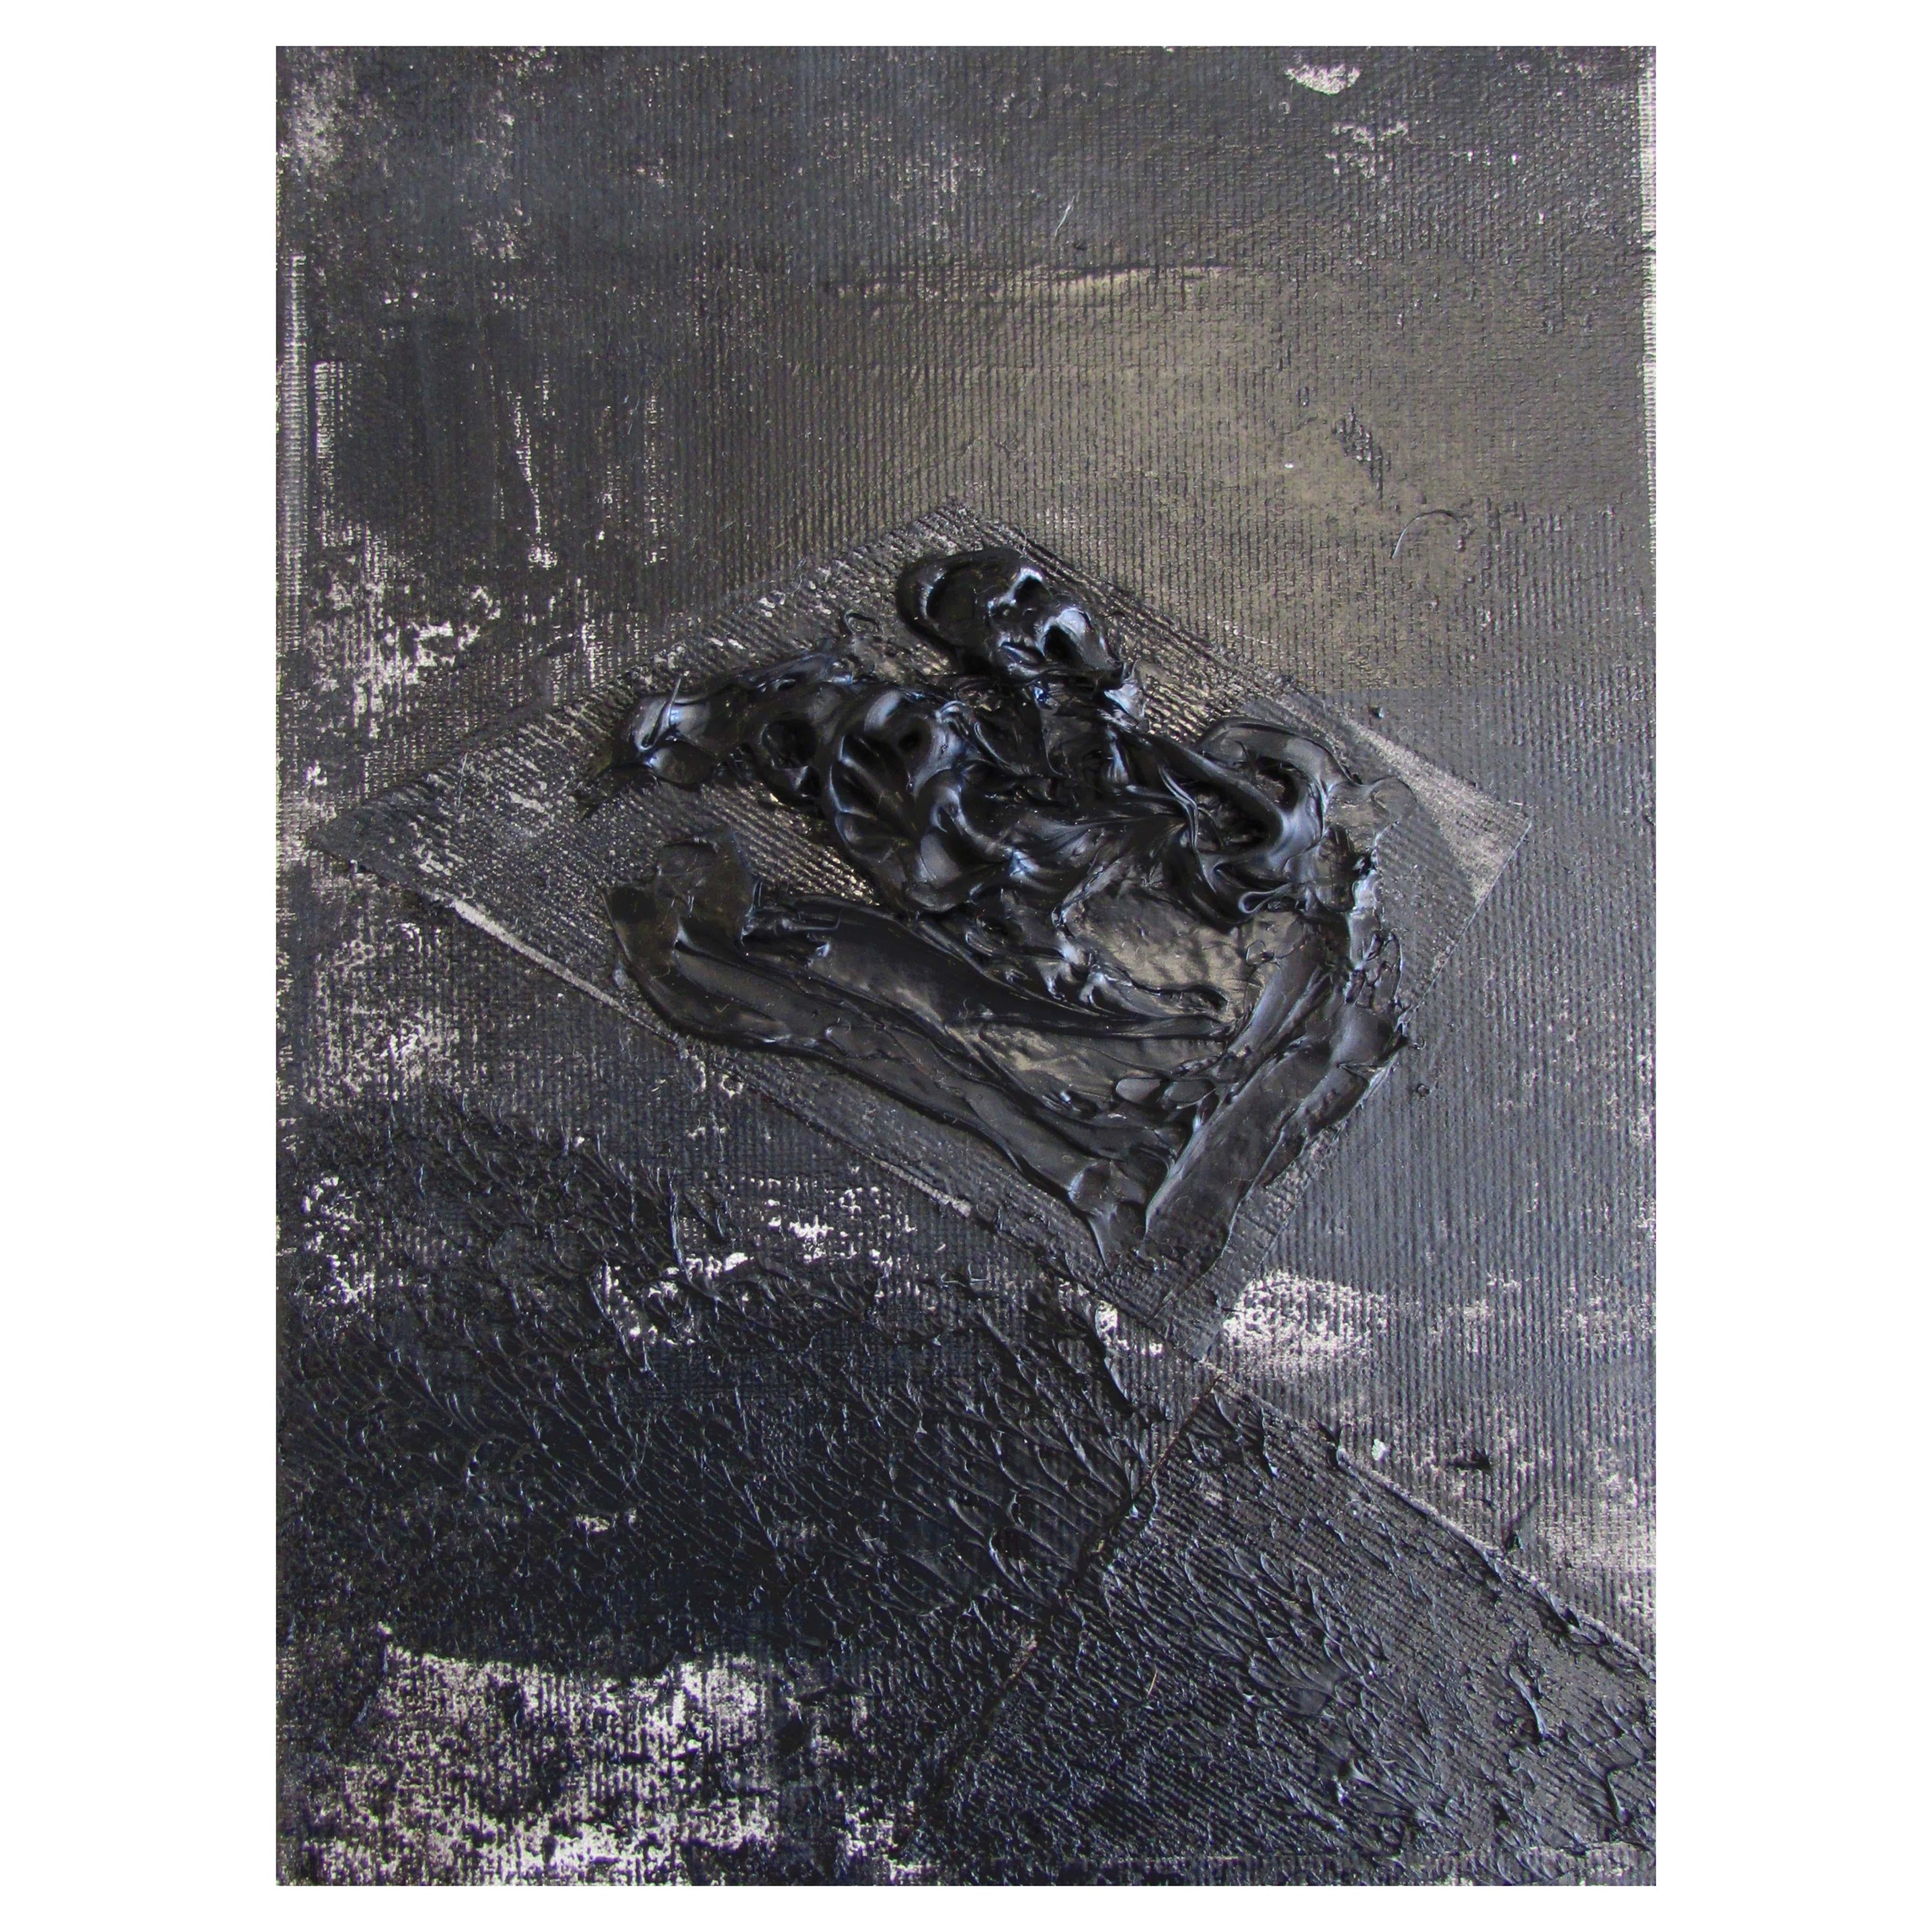 Zsolt Berszán Abstract Painting - Untitled 02 [Dissecting the Unknown 02] - Contemporary, Black, Monochrome